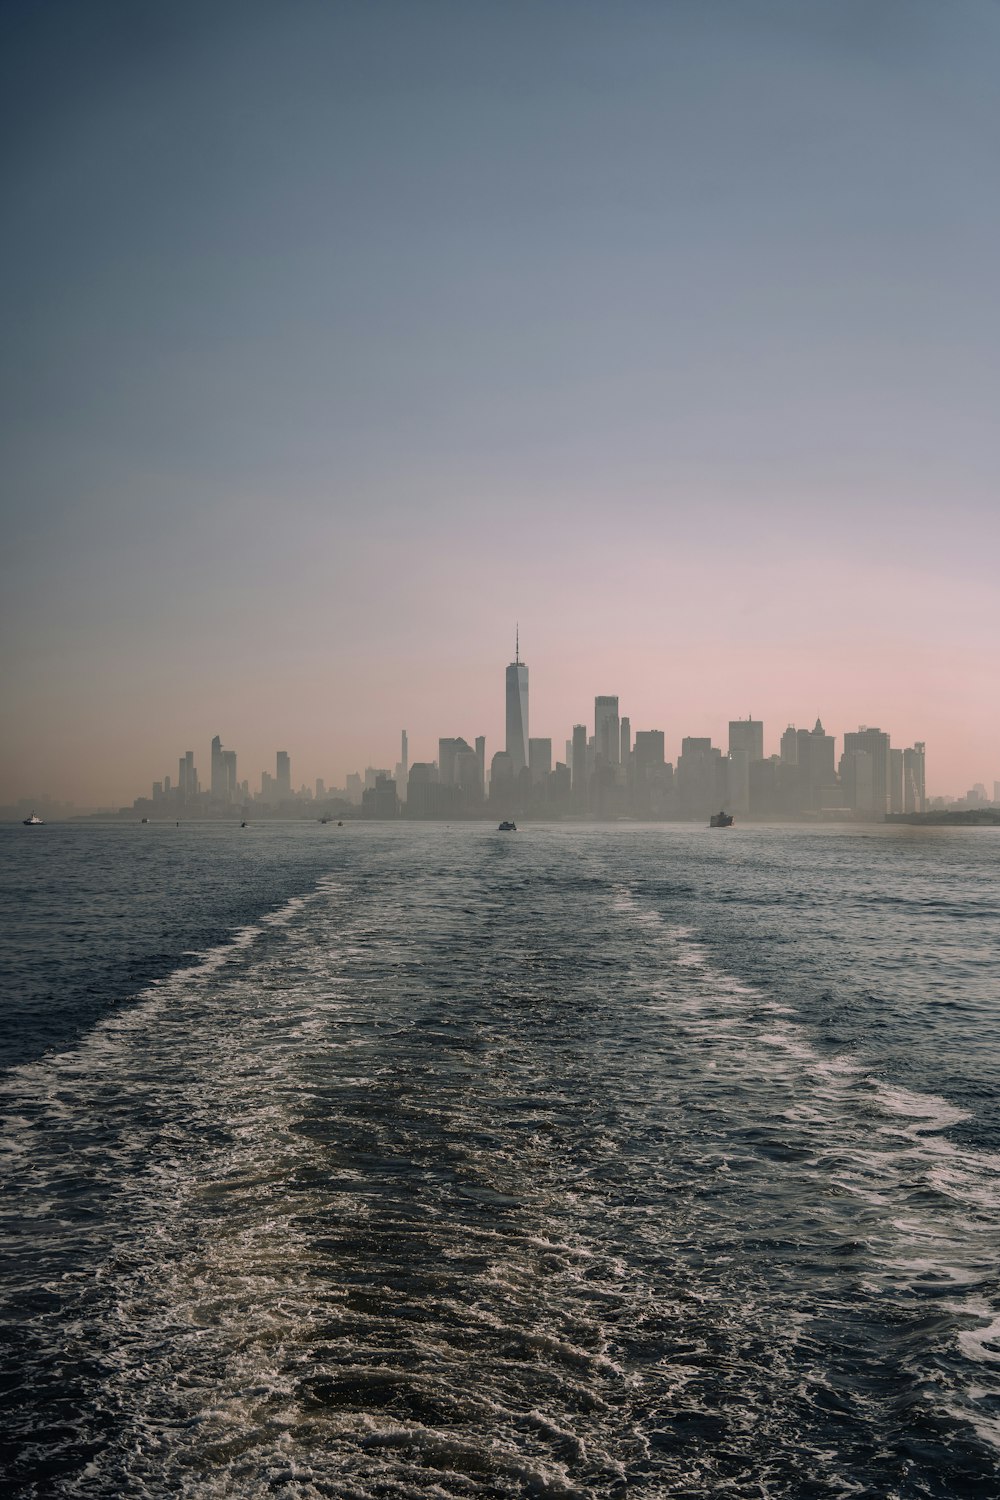 the skyline of a large city as seen from a boat